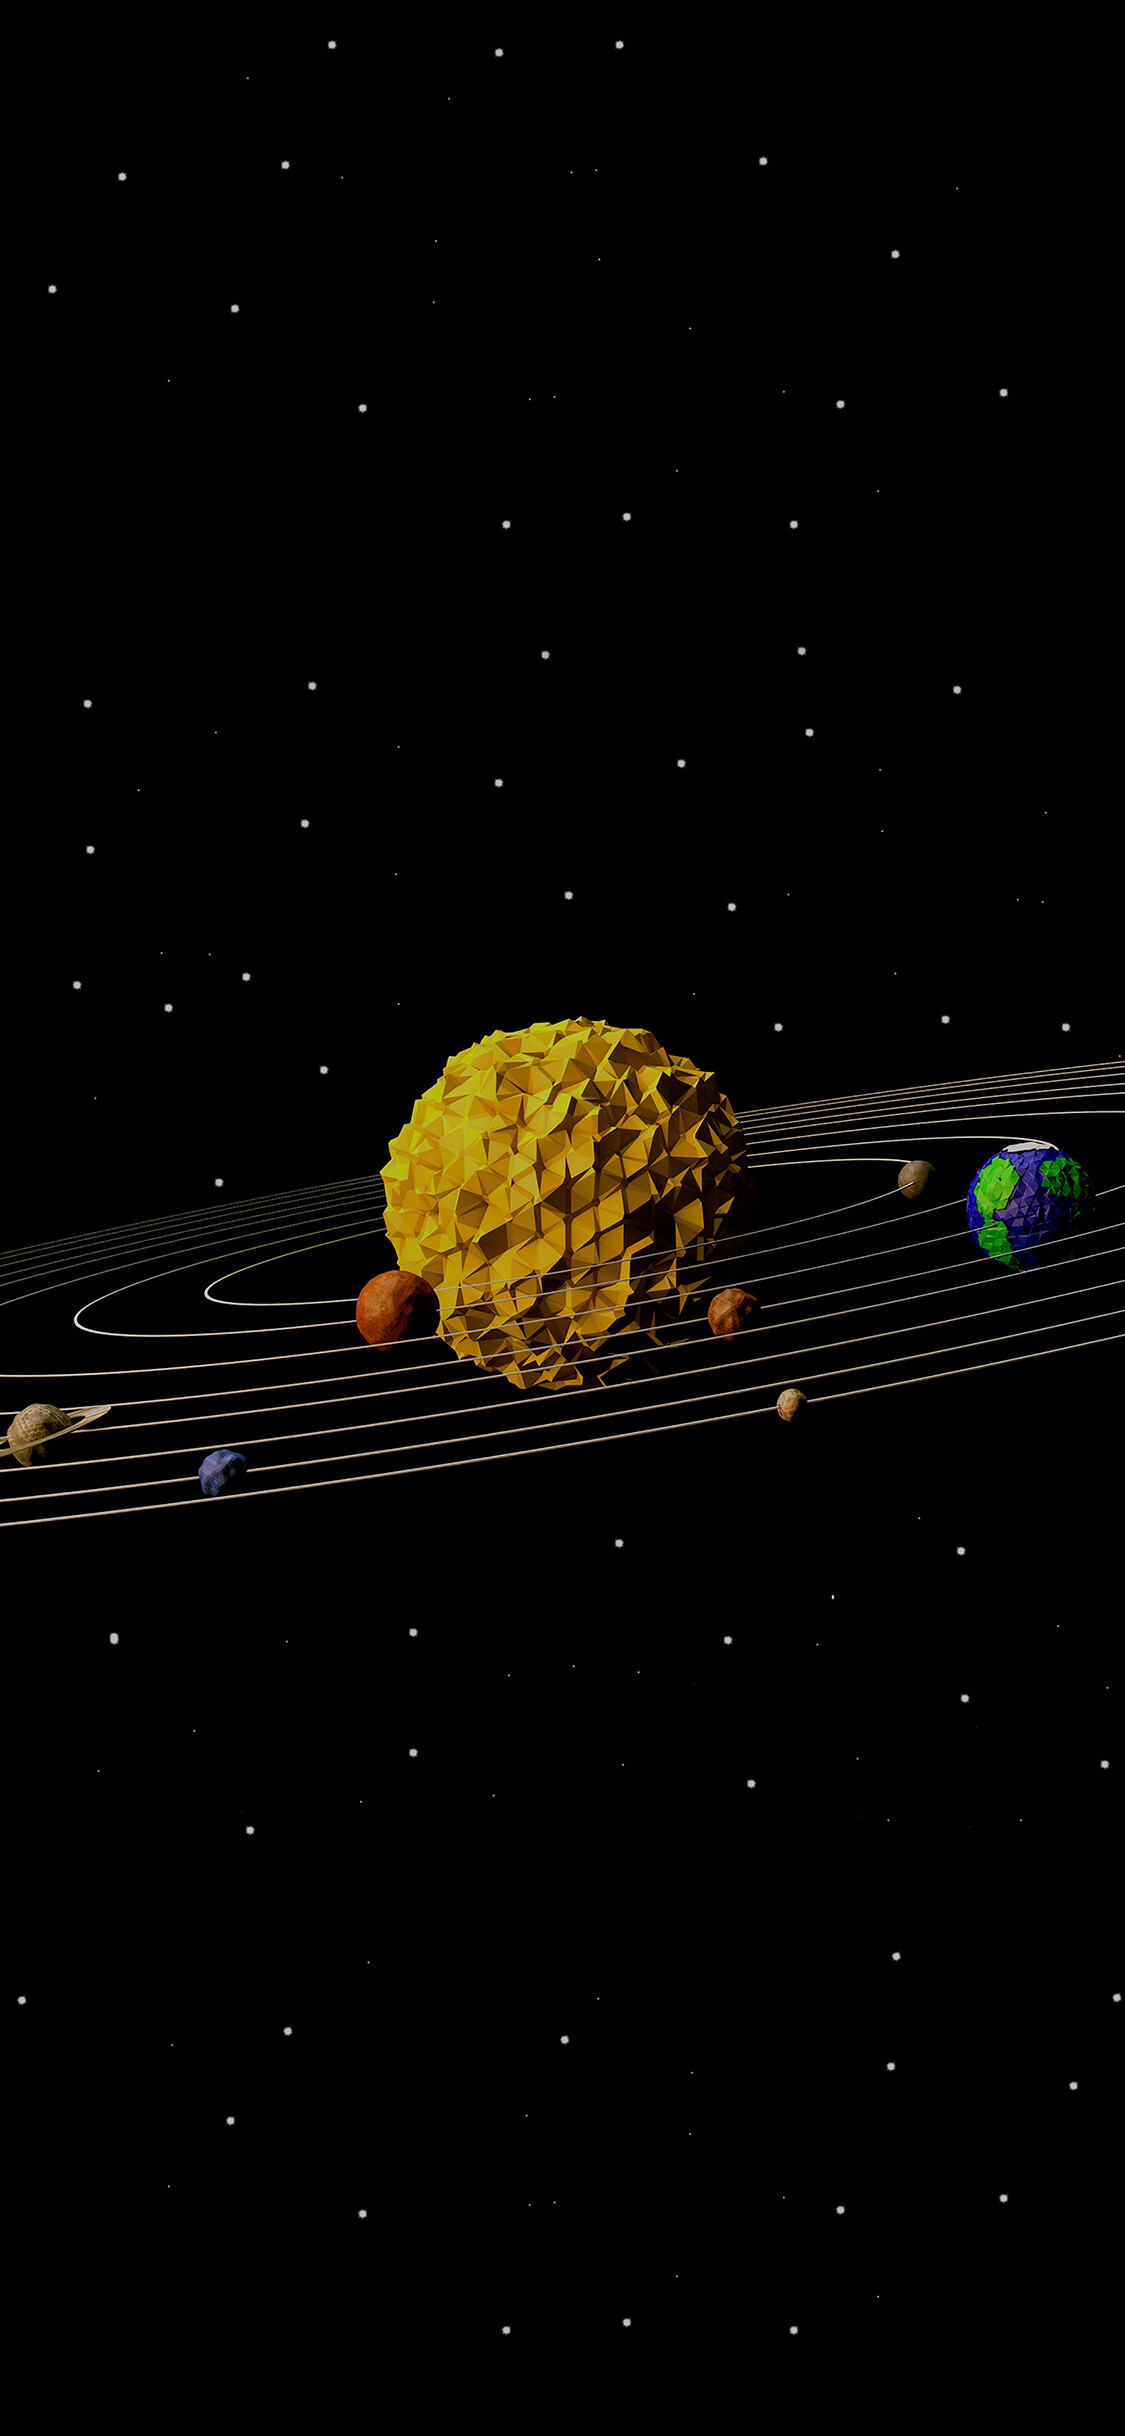 Solar System: A medium-size star with eight planets orbiting it, The Sun. 1130x2440 HD Wallpaper.